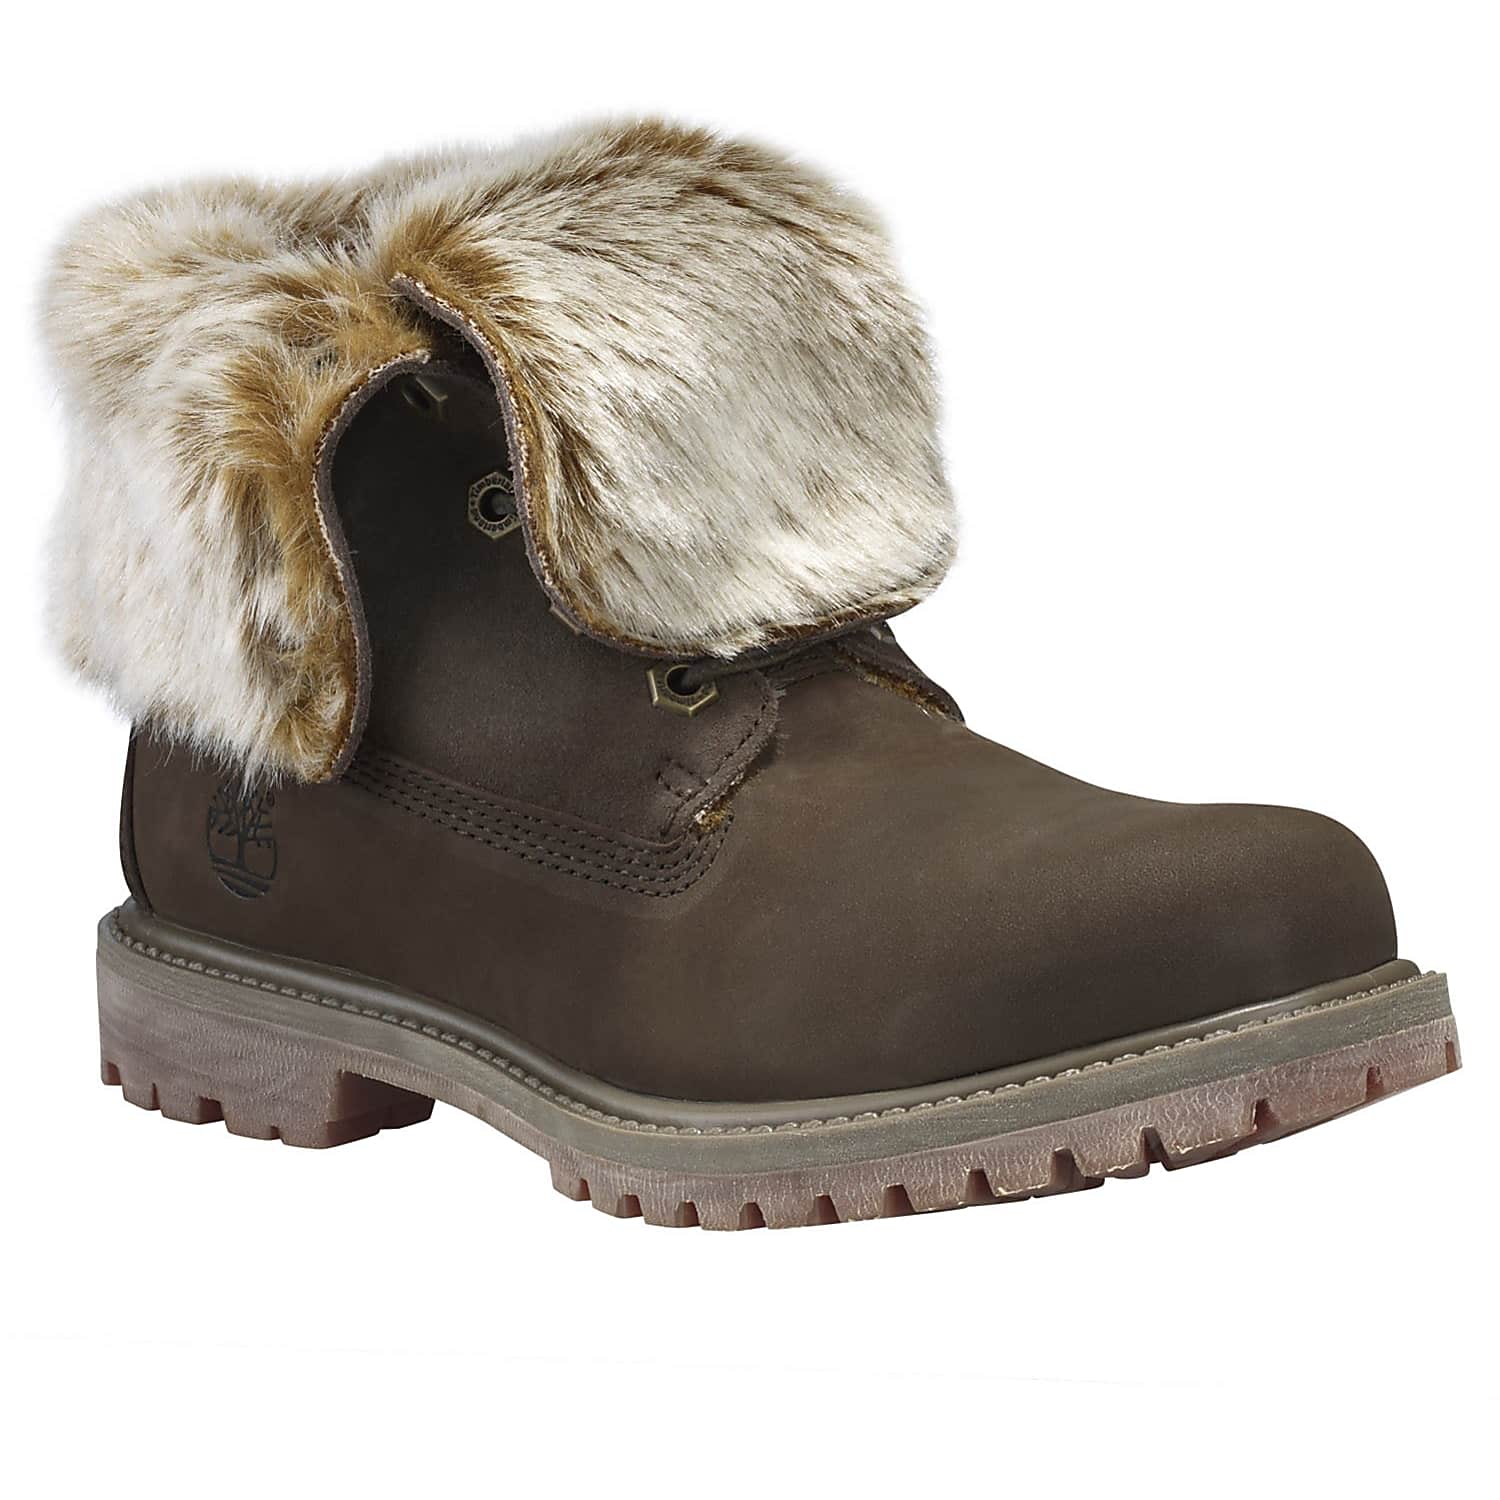 adidas timberland boots with fur